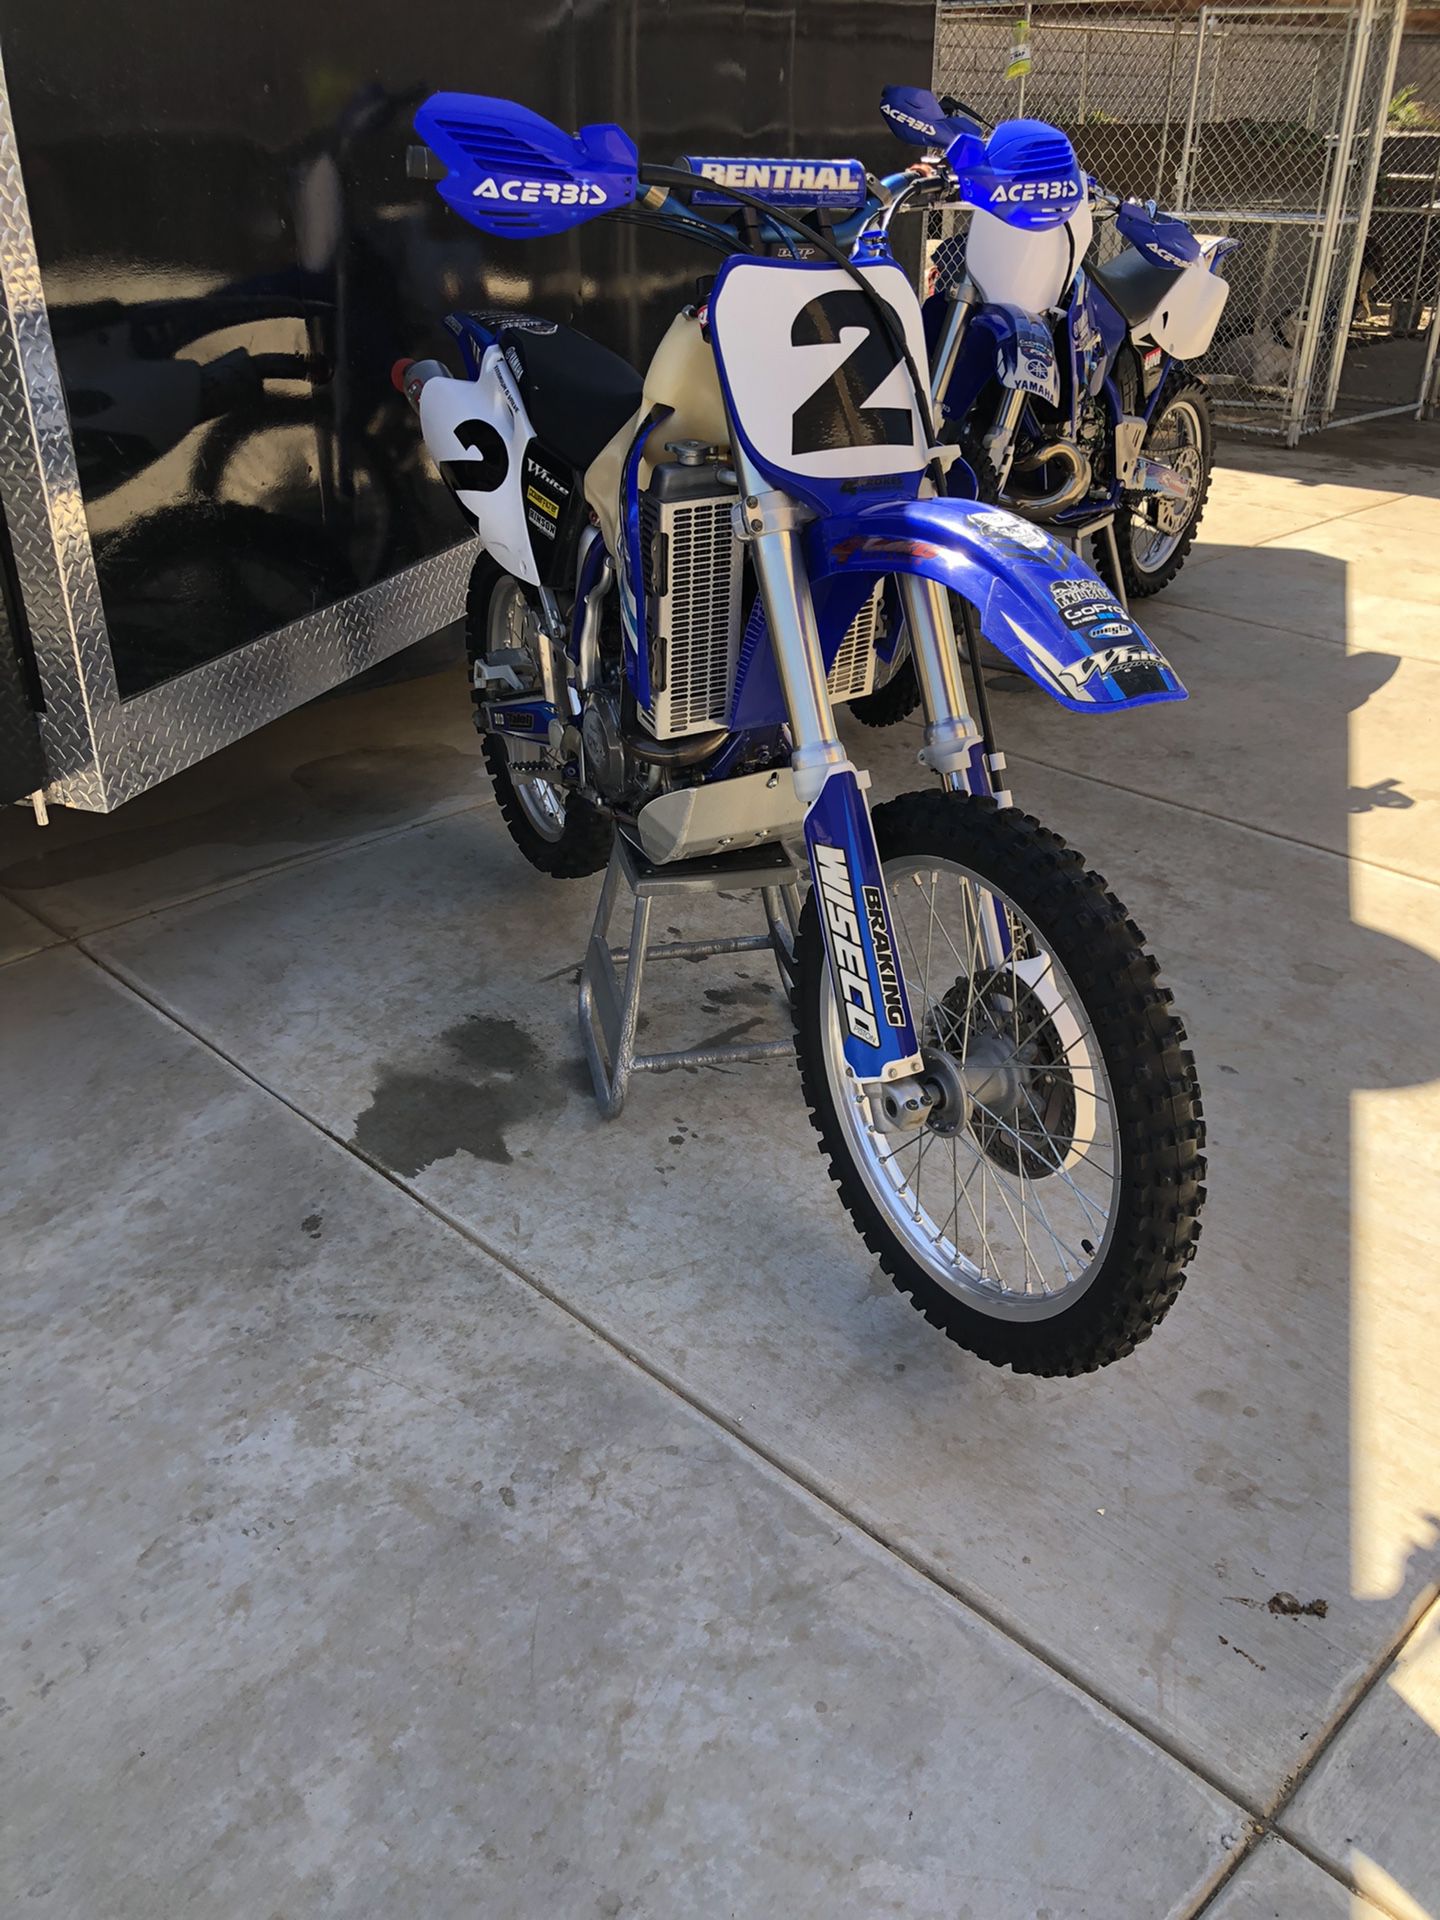 2002 Yz 450 And 1997 Yz 250 